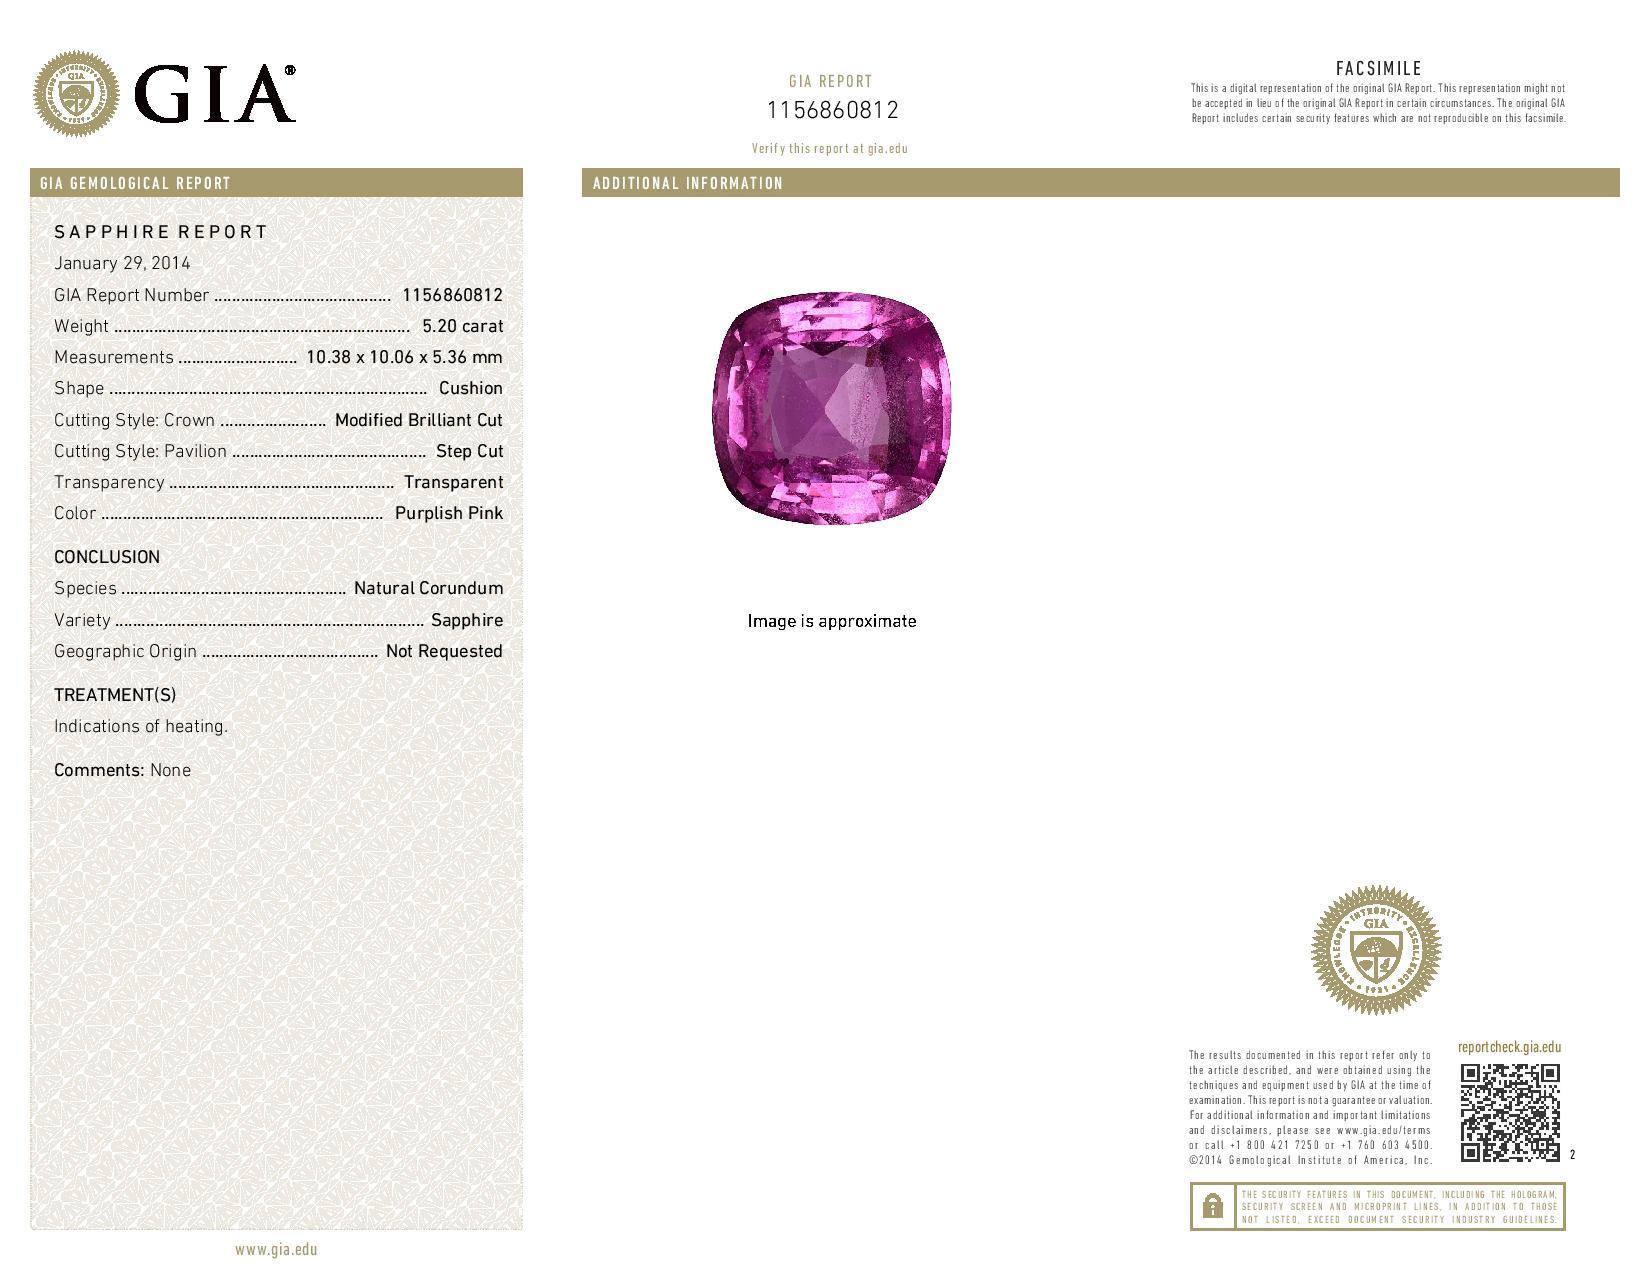 This handsome 18k dome ring features a GIA certified 5.20 carat purplish pink sapphire with magnificent color! Few gems are able to combine the intense color of a perfect peony and the extraordinary brilliance of a sapphire, and pink sapphires of